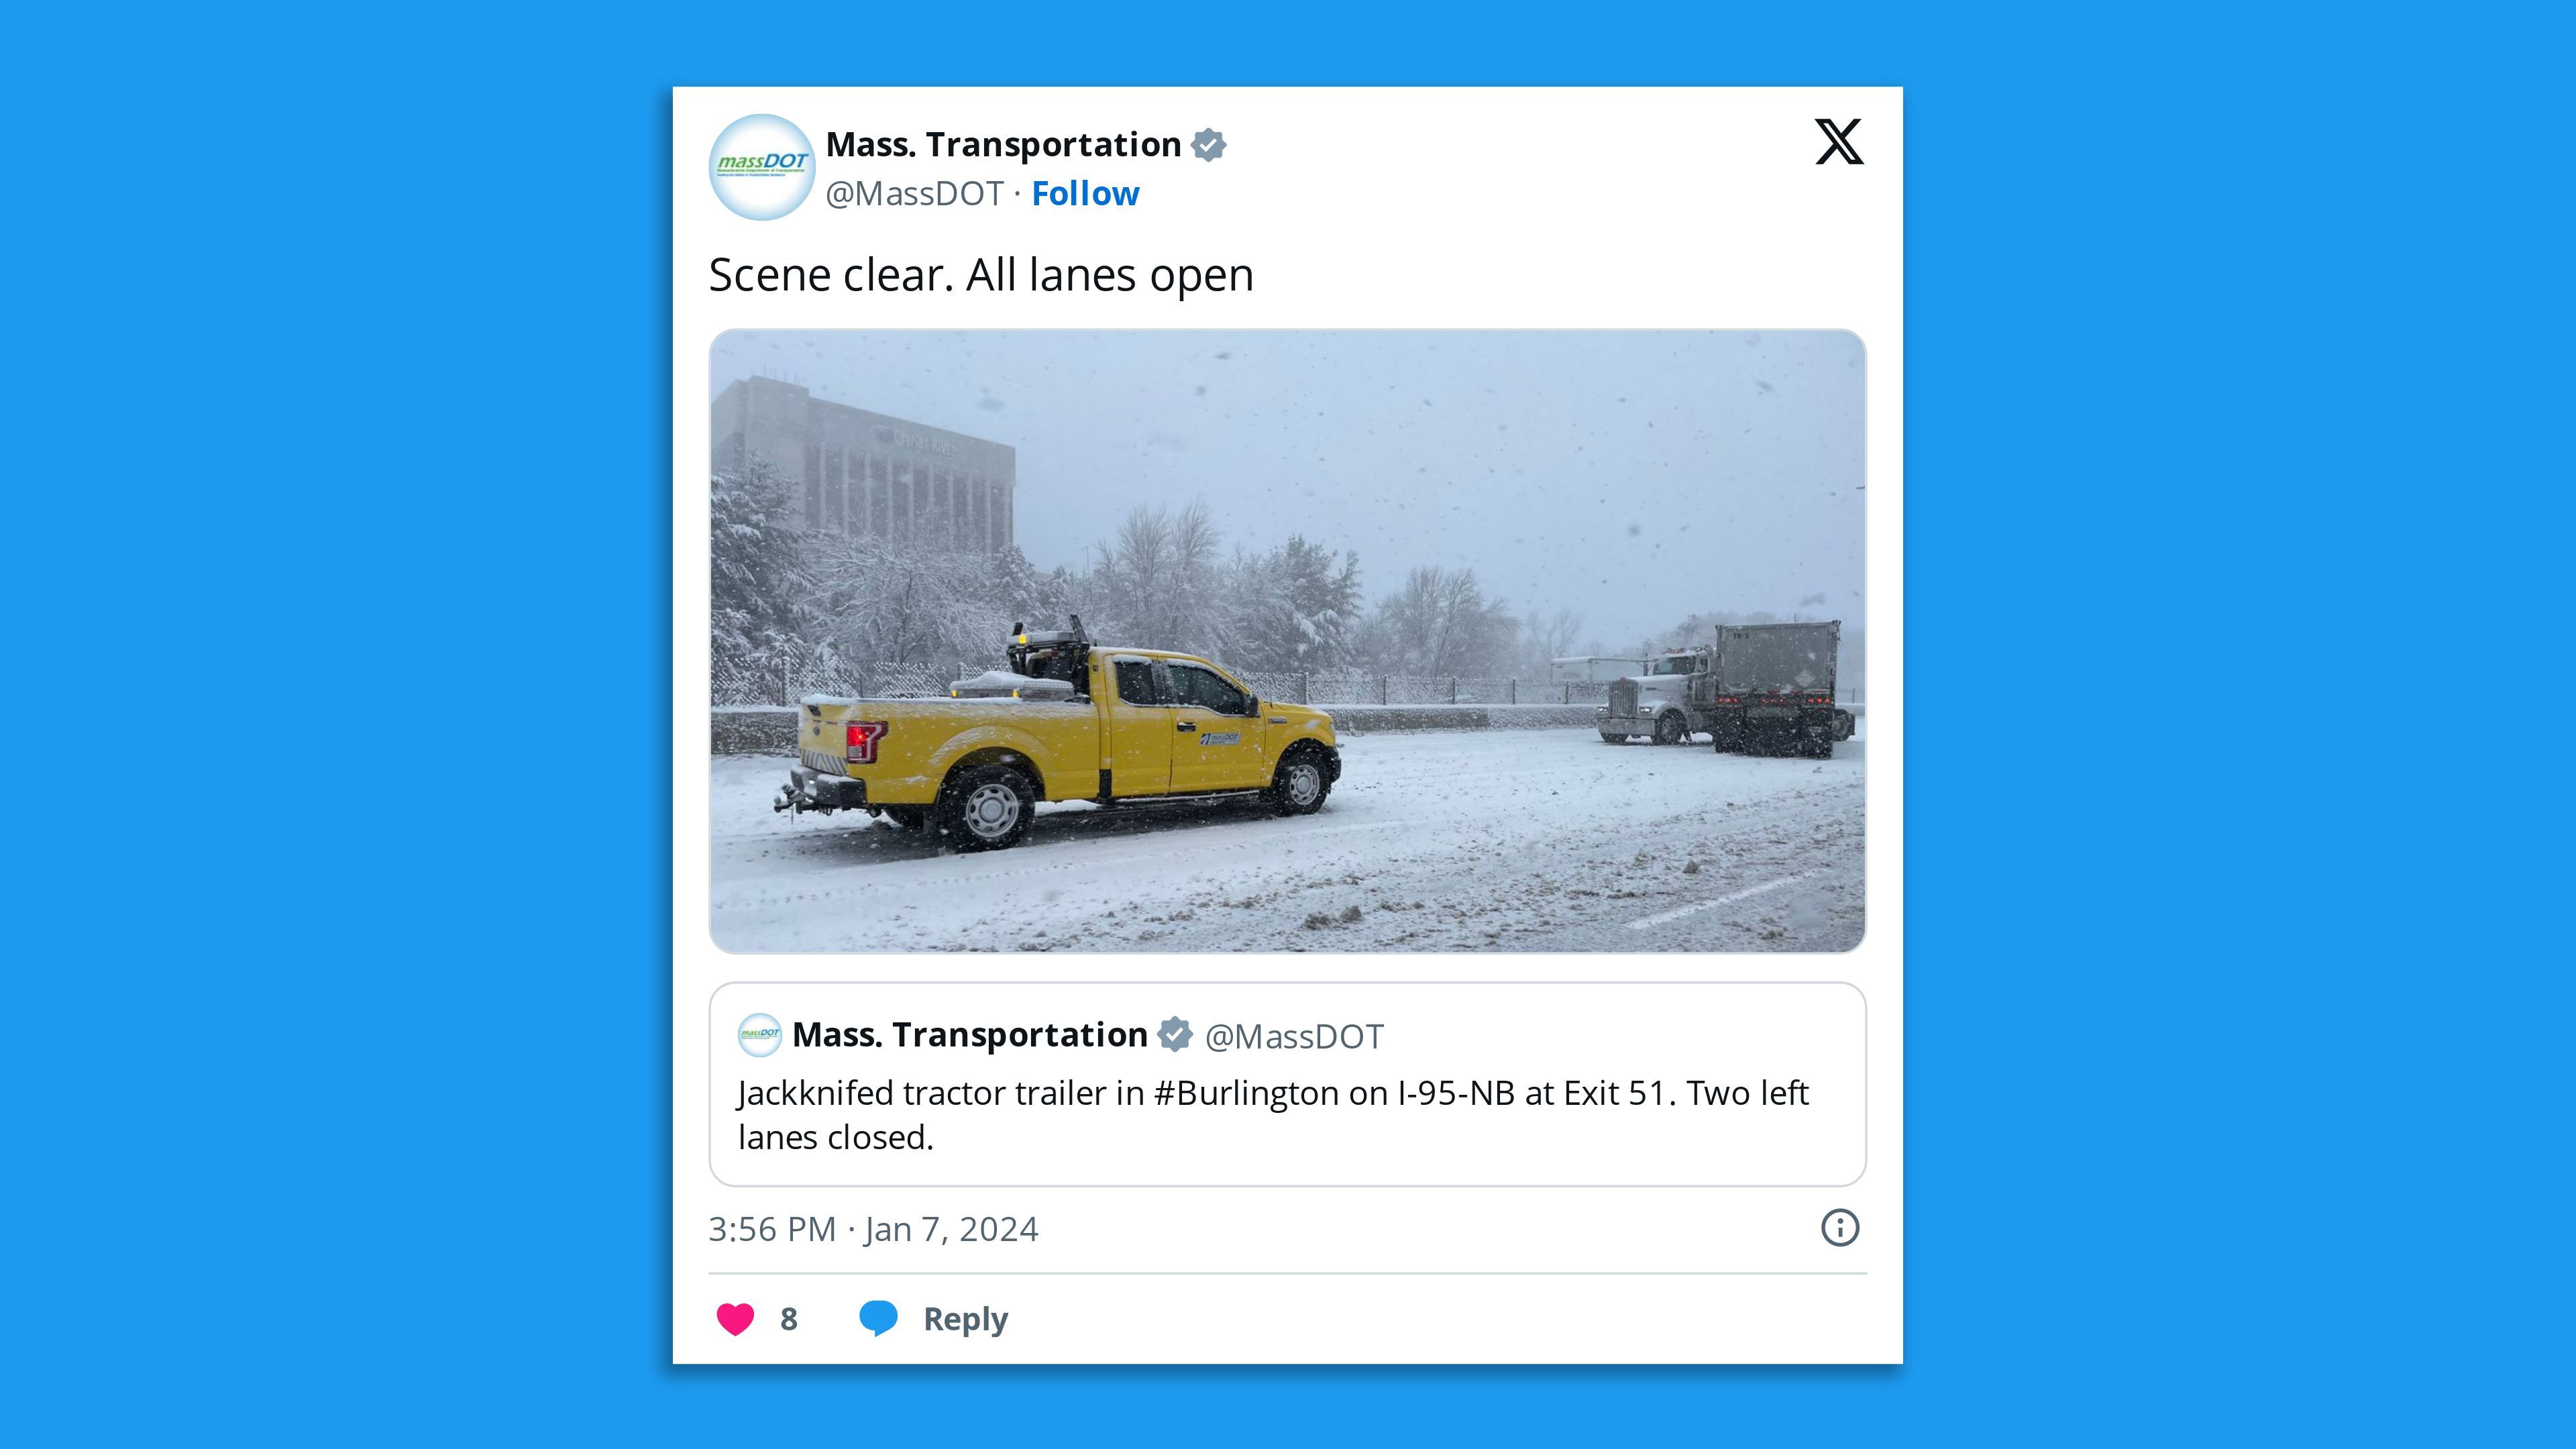 A screenshot of a Mass. DOT tweet showing vehicles on a show-covered road with the caption "Scene clear. All lanes open" in a RT of an earlier tweet saying "Jackknifed tractor trailer in #Burlington on I-95-NB at Exit 51. Two left lanes closed."